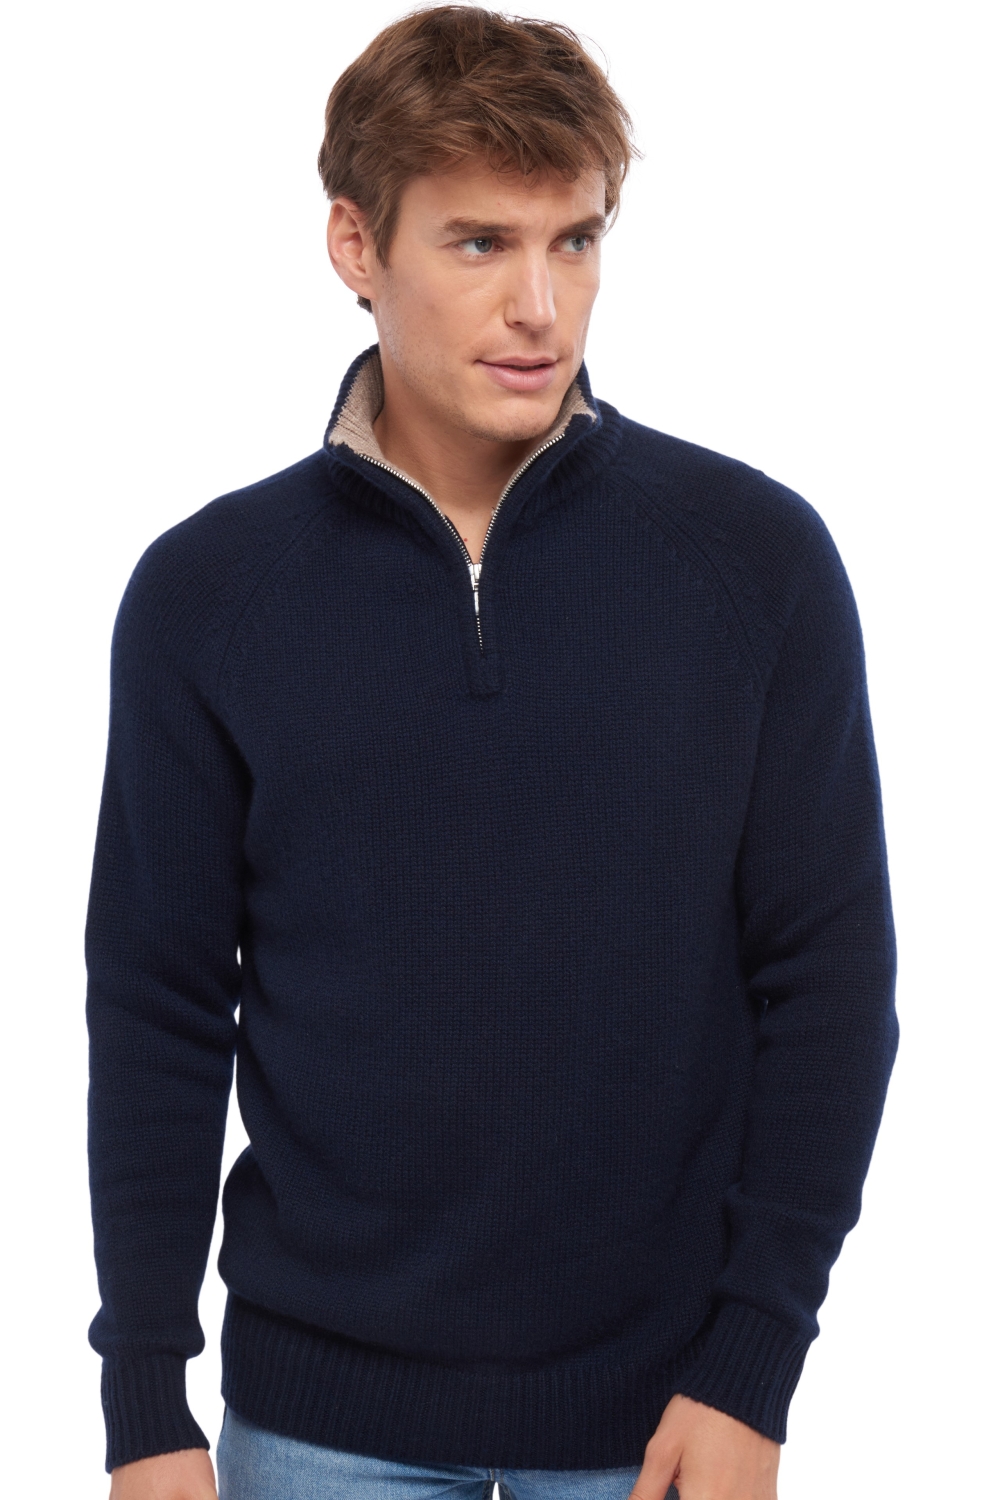 Cashmere uomo angers blu notte toast s